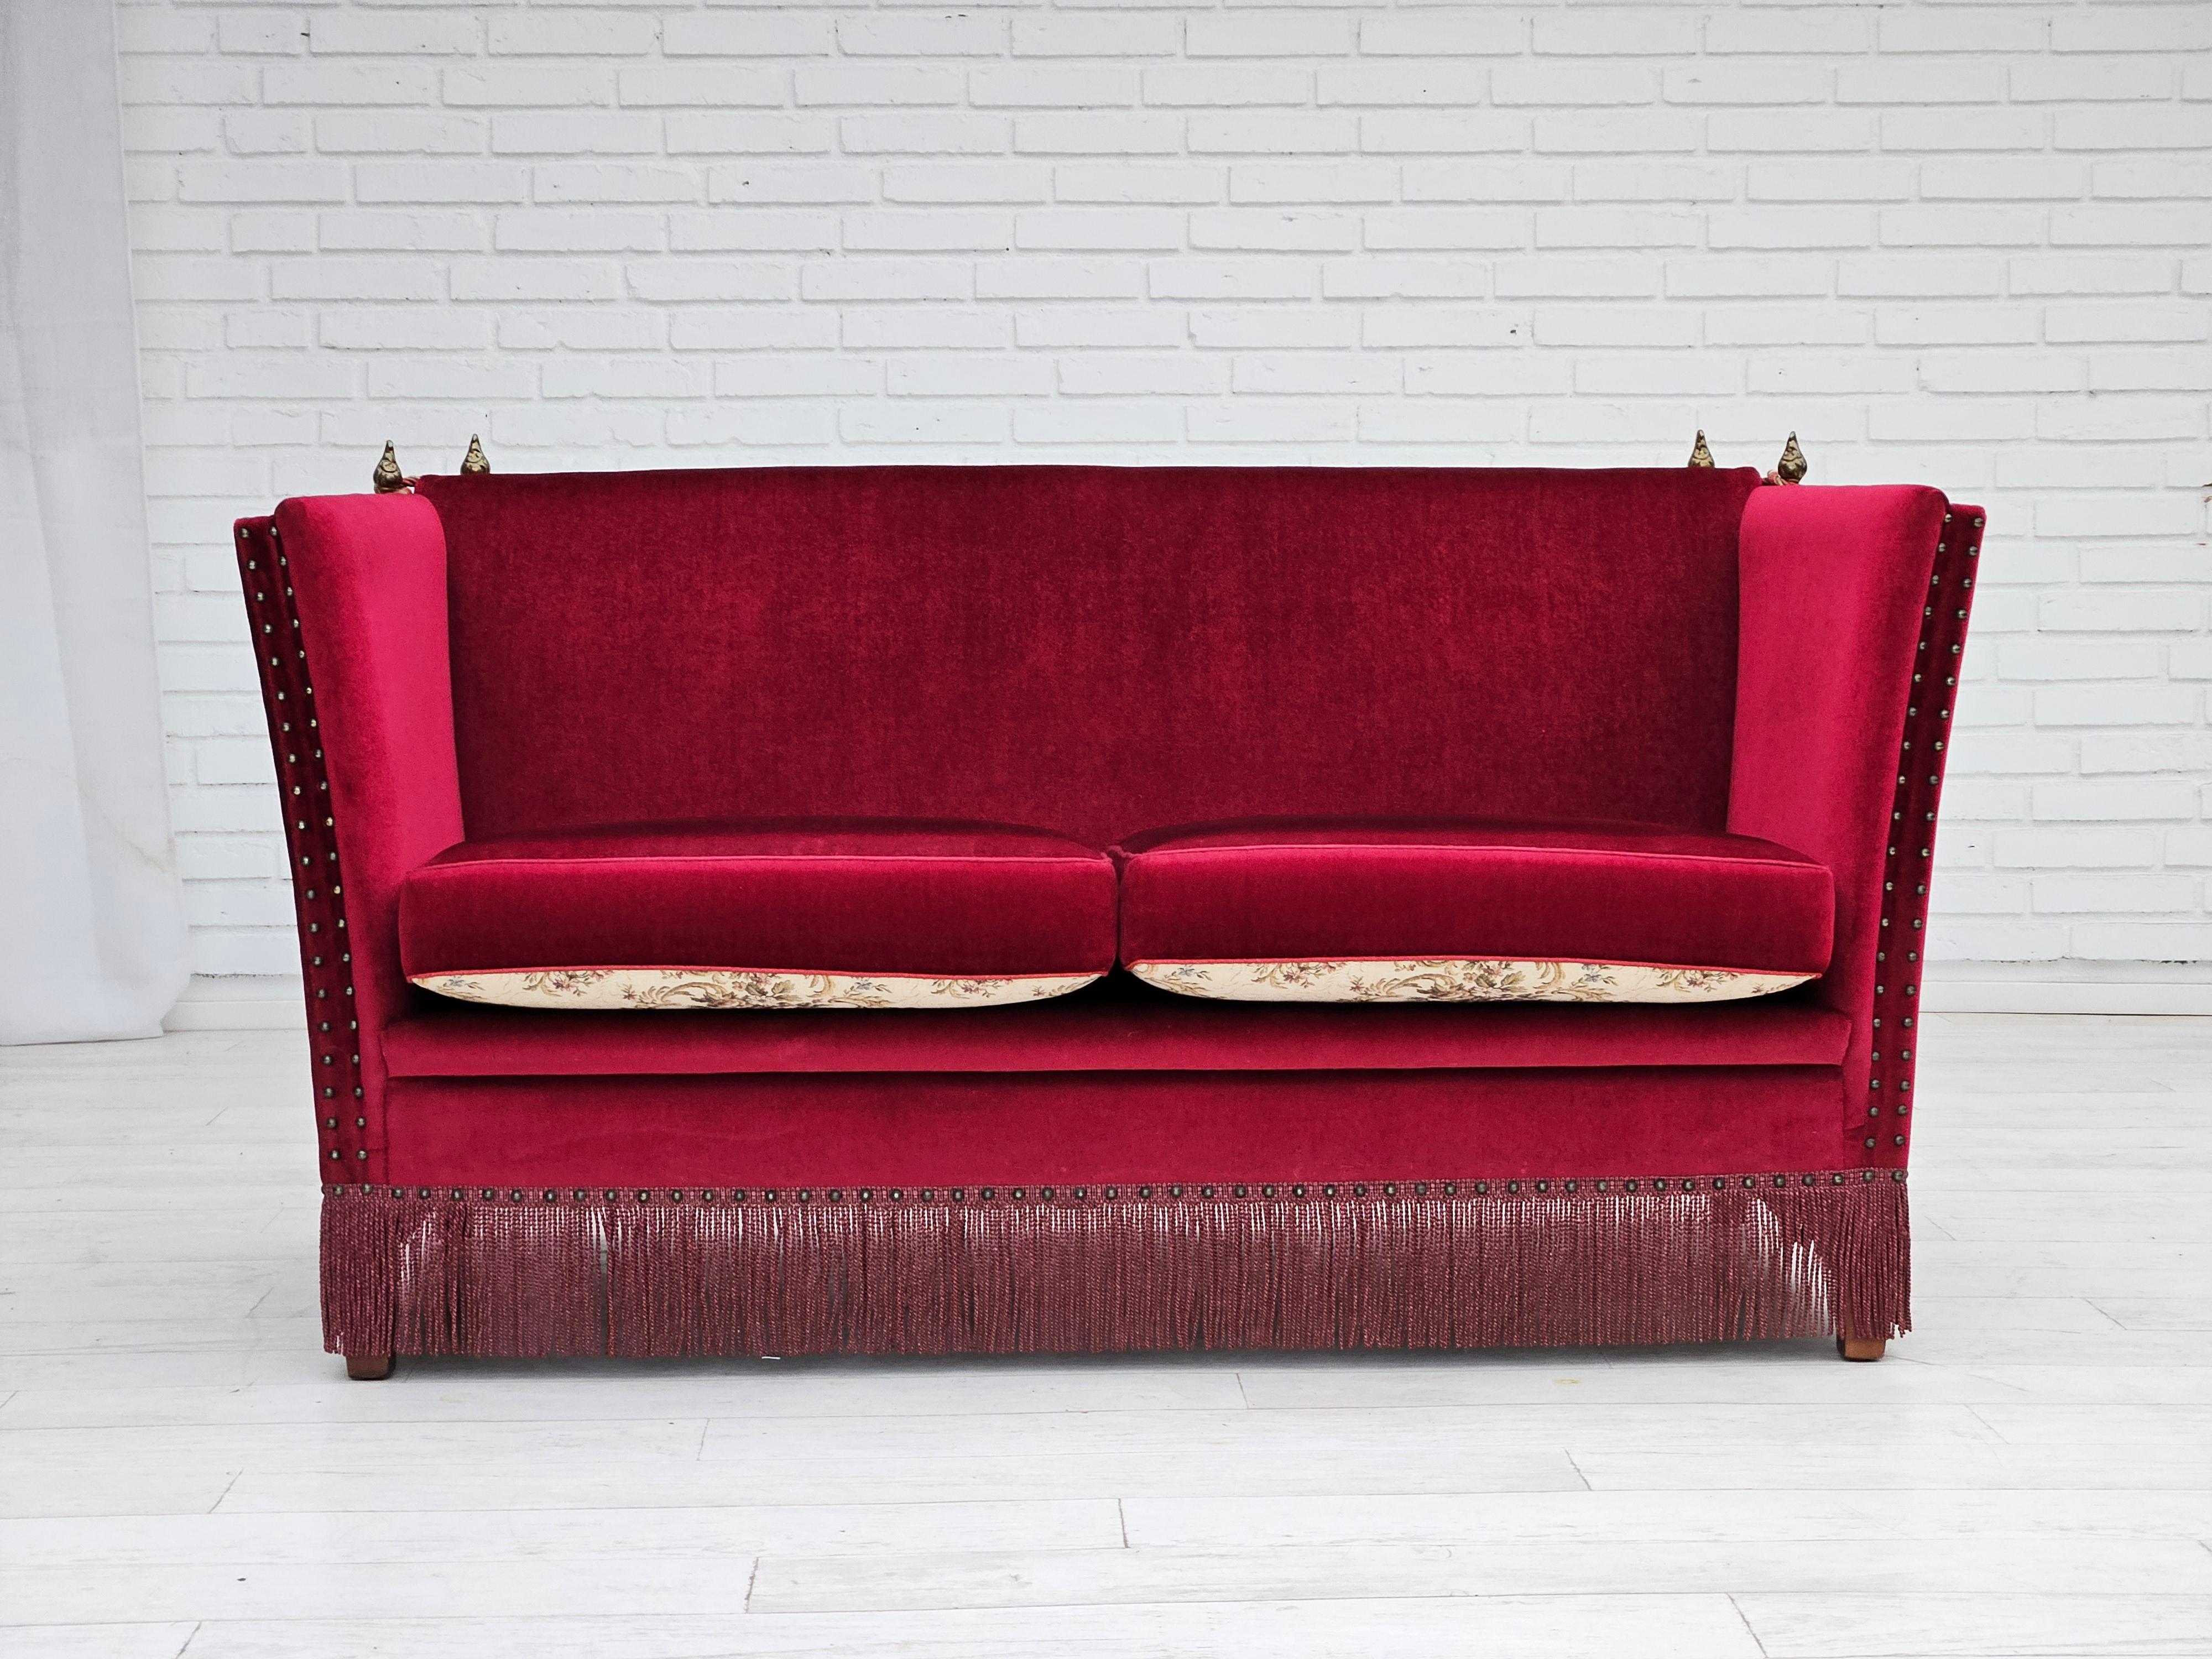 1960s, Danish 2 seater sofa in original very good condition: no smells and no stains. Cherry-red velour and beige furniture fabric. Removable double-sided seat cushions. Manufactured by Danish furniture manufacturer in about 1960s. Beech wood legs.